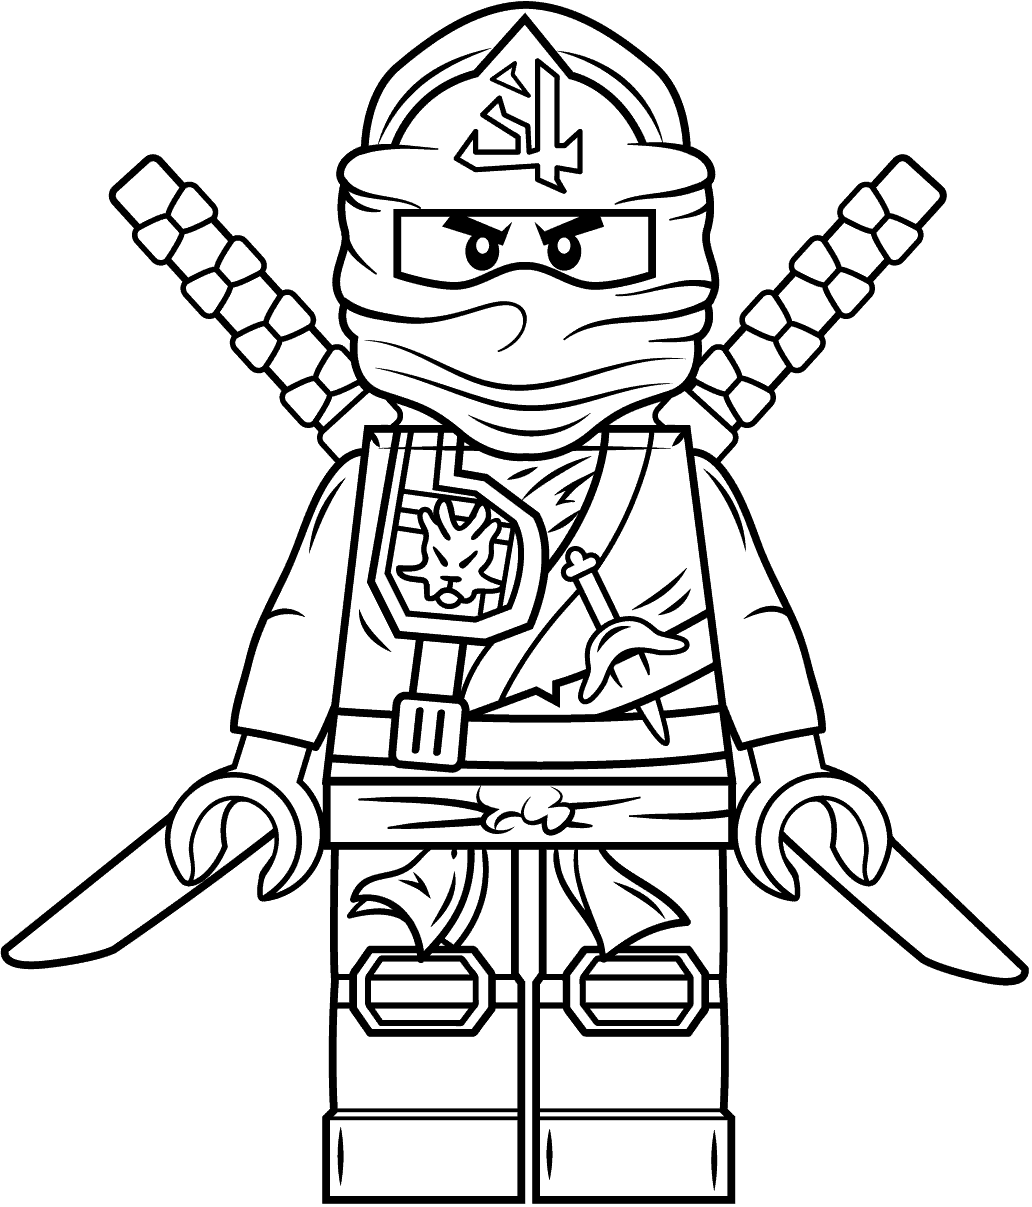 Lego Ninjago Coloring Pages - Free Printable Coloring Pages for Kids